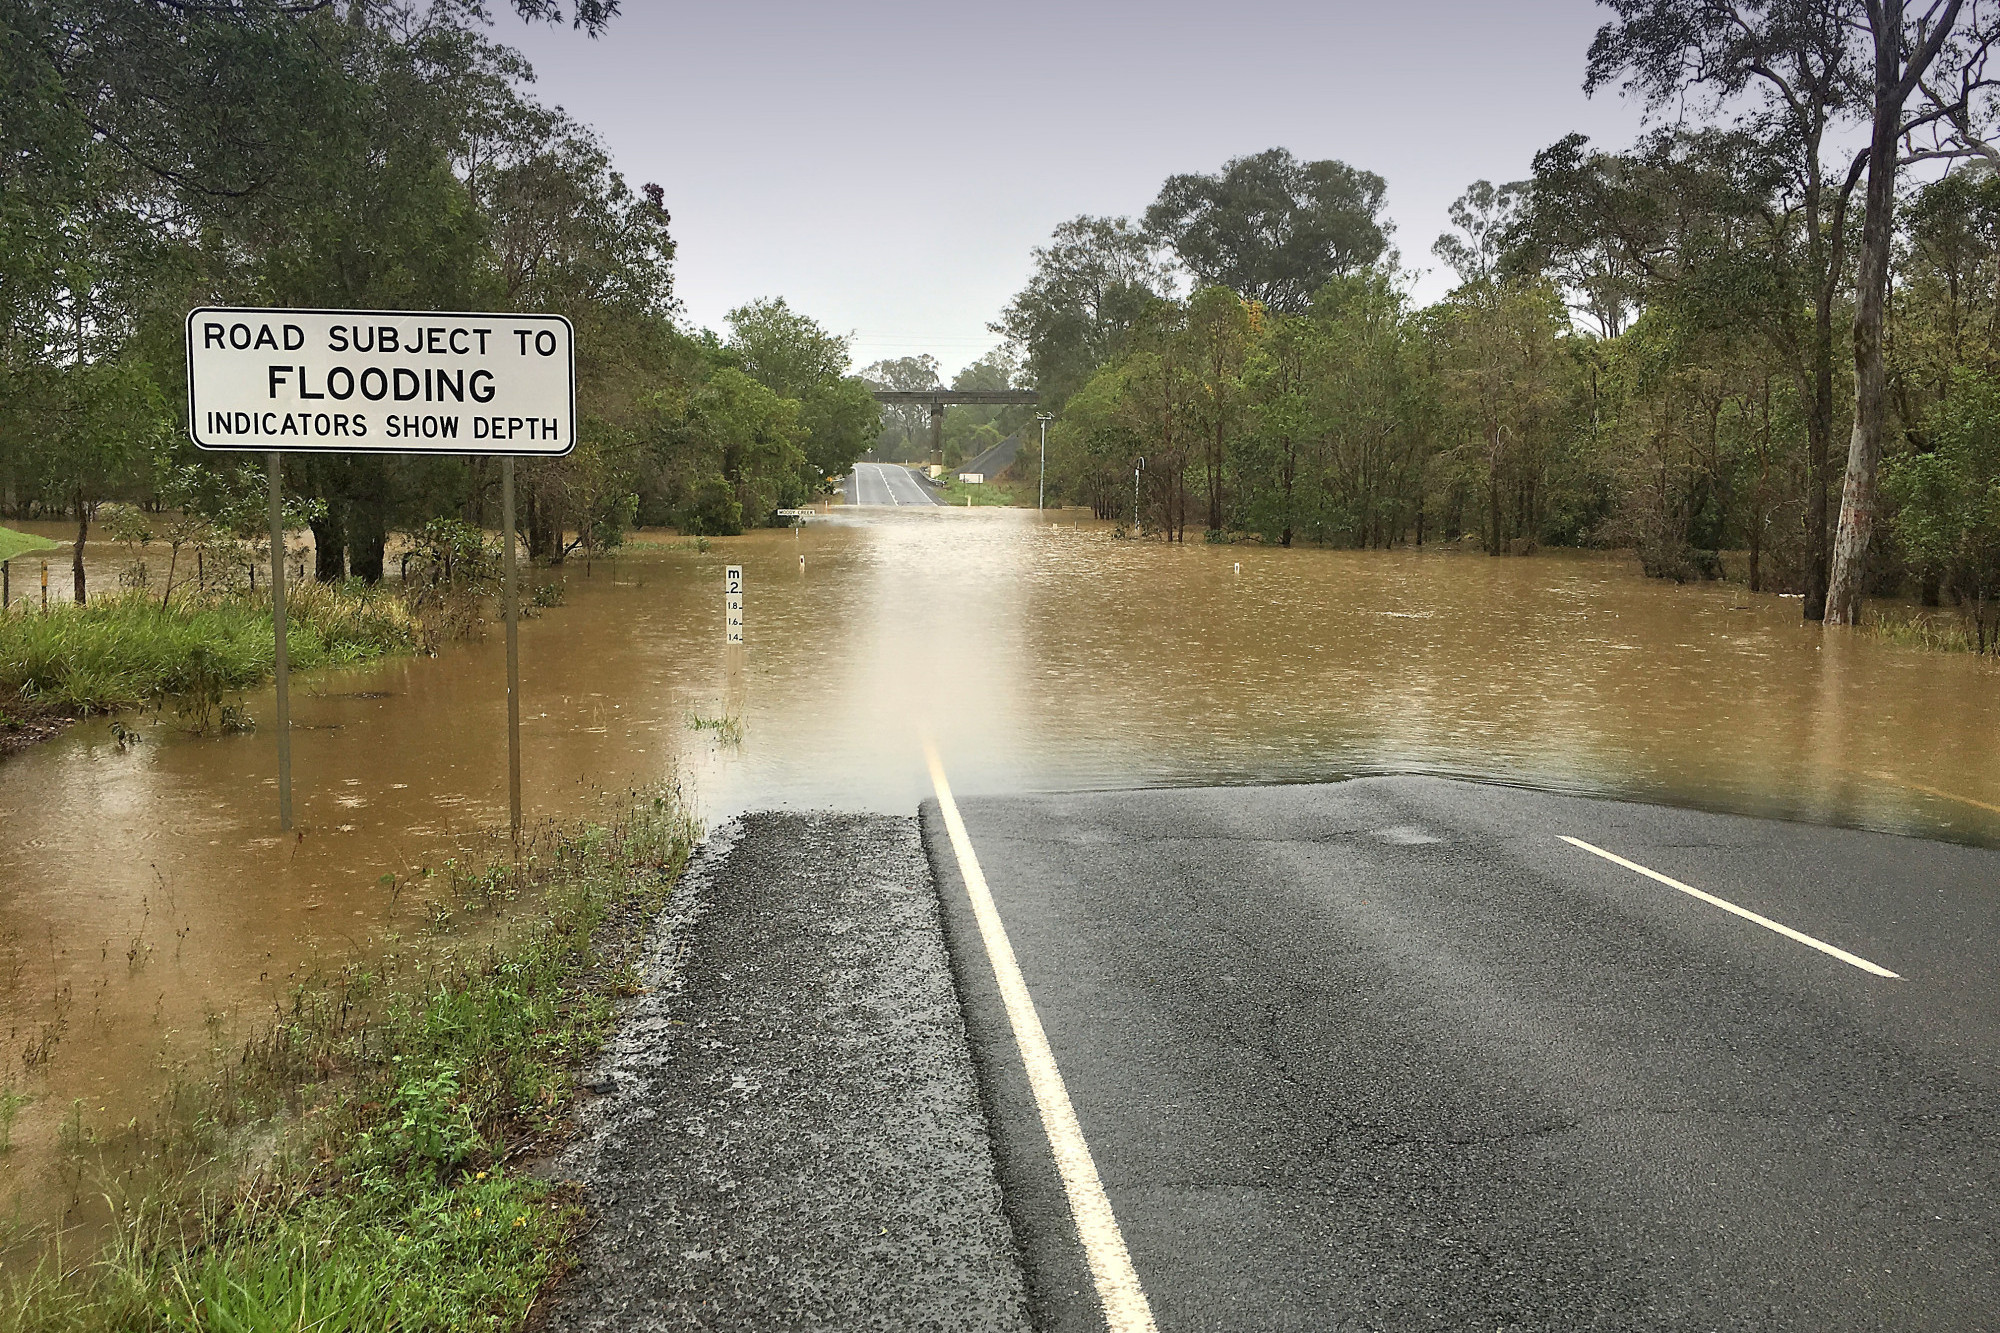 Never drive, ride or walk through flooded waters - feature photo